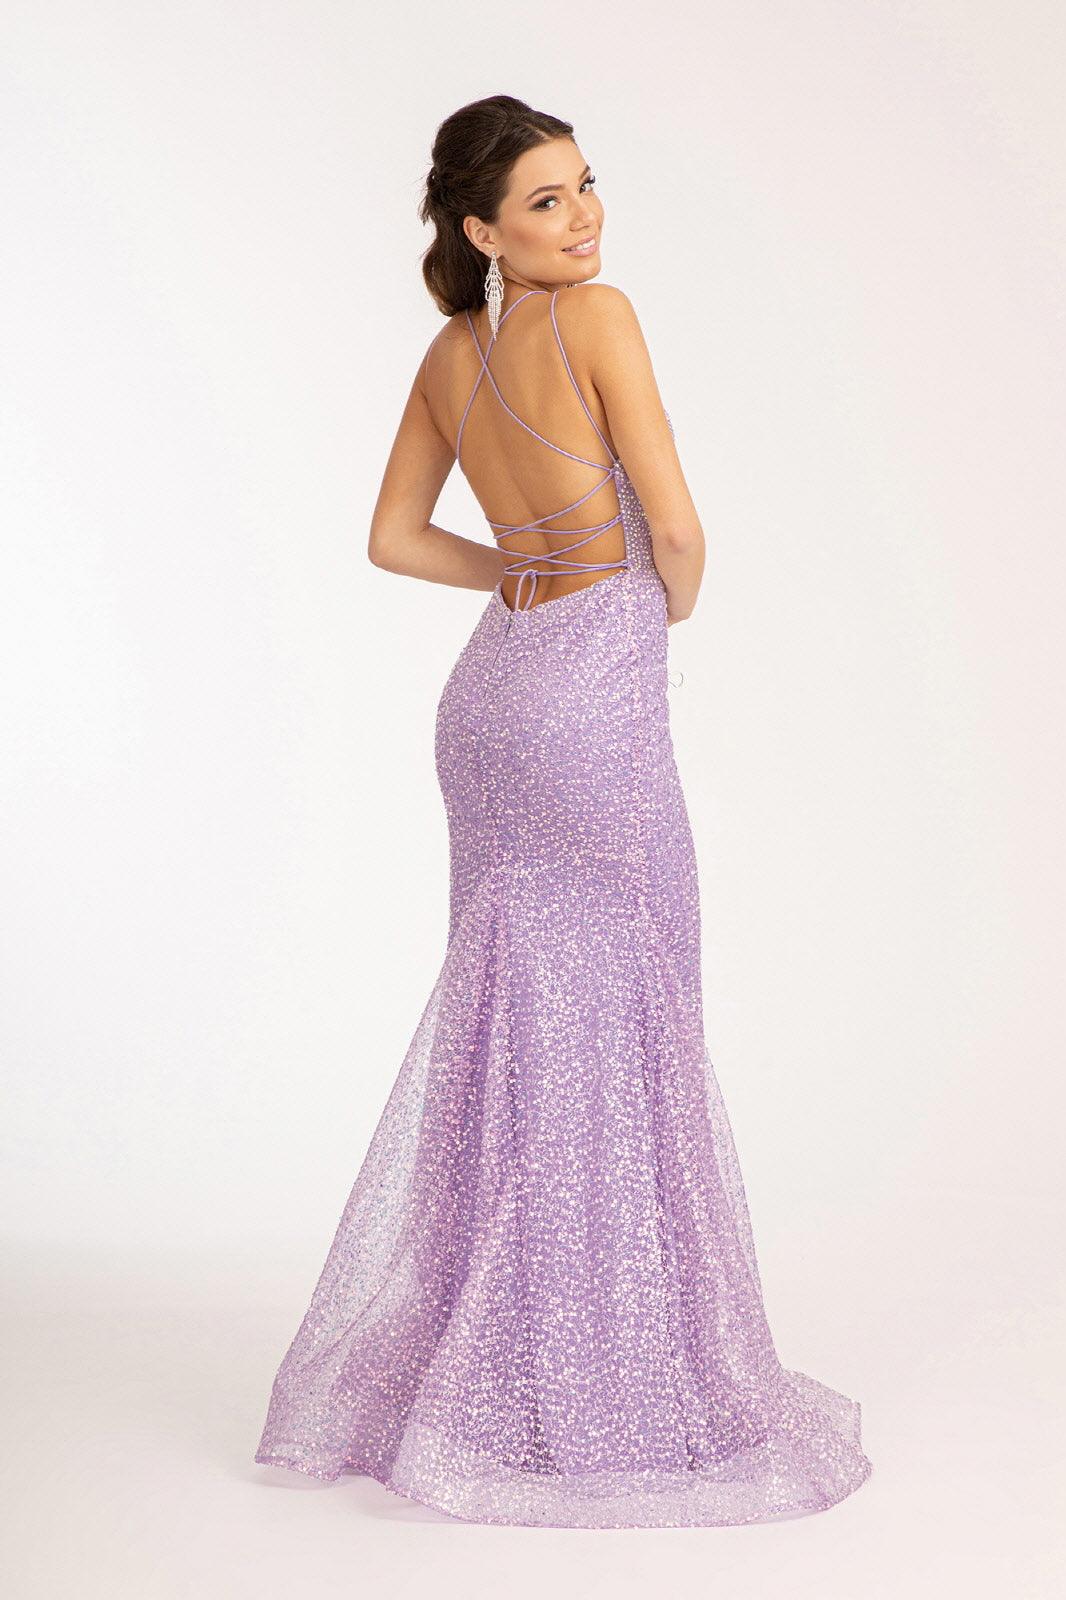 Lilac Long Formal Mesh Mermaid Prom Dress │ The Dress Outlet for $296.99